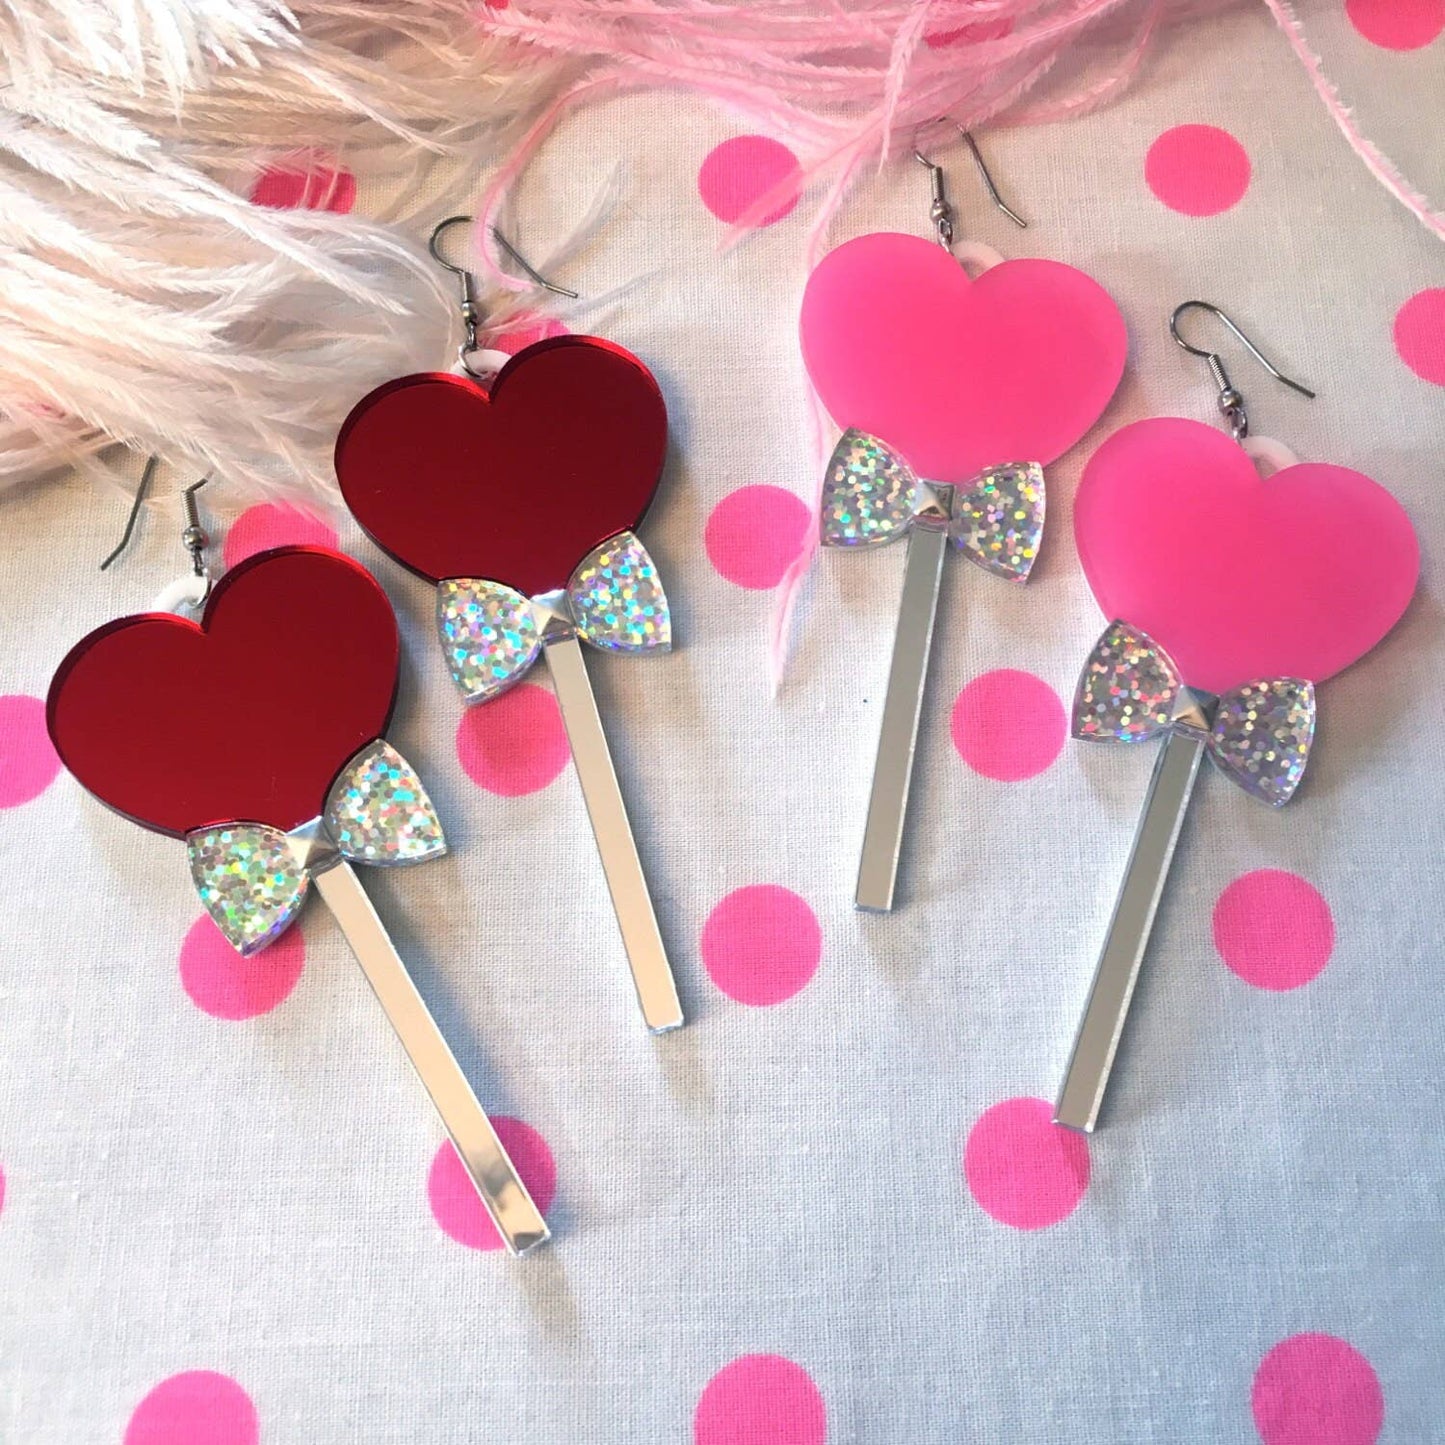 I'm Your Present - Lollipop Hearts Candy Earrings, Red